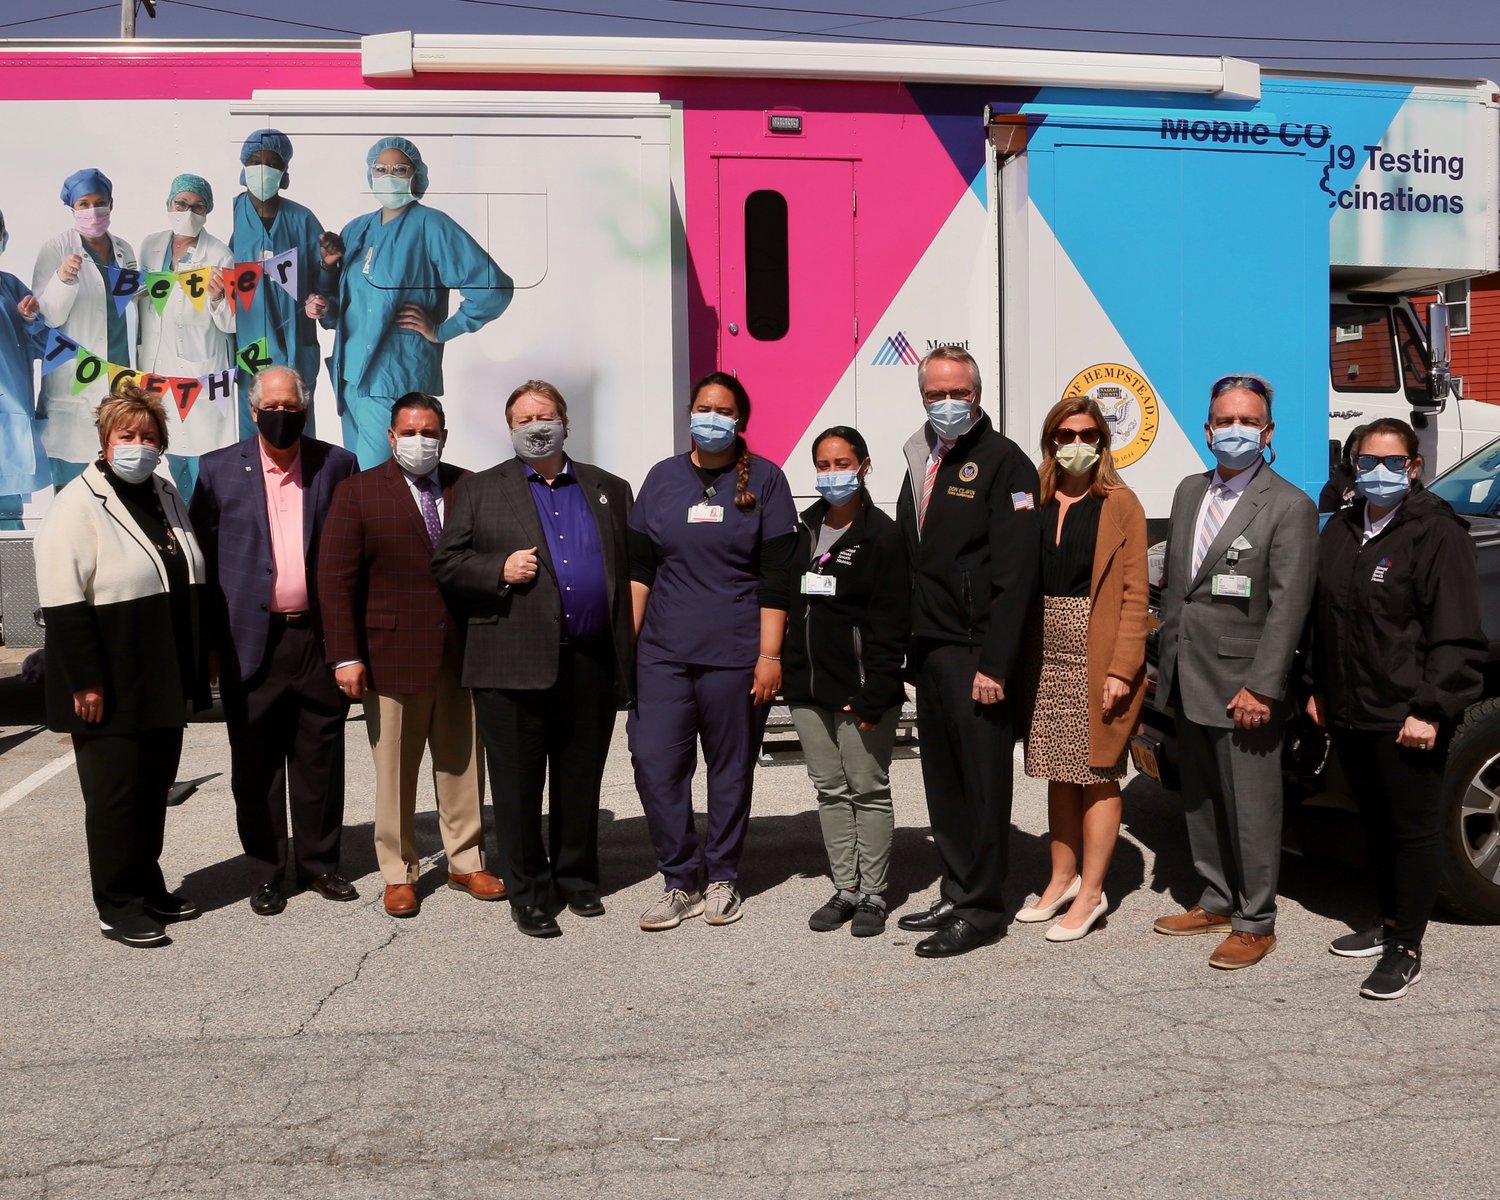 The Town of Hempstead’s “Vaxmobile” rolled through Island Park on April 6 and 7, as elected officials, staff from Mount Sinai South Nassau hospital and residents gathered so that many people who have struggled to make appointments could get inoculated with the single-dose Johnson & Johnson vaccine.